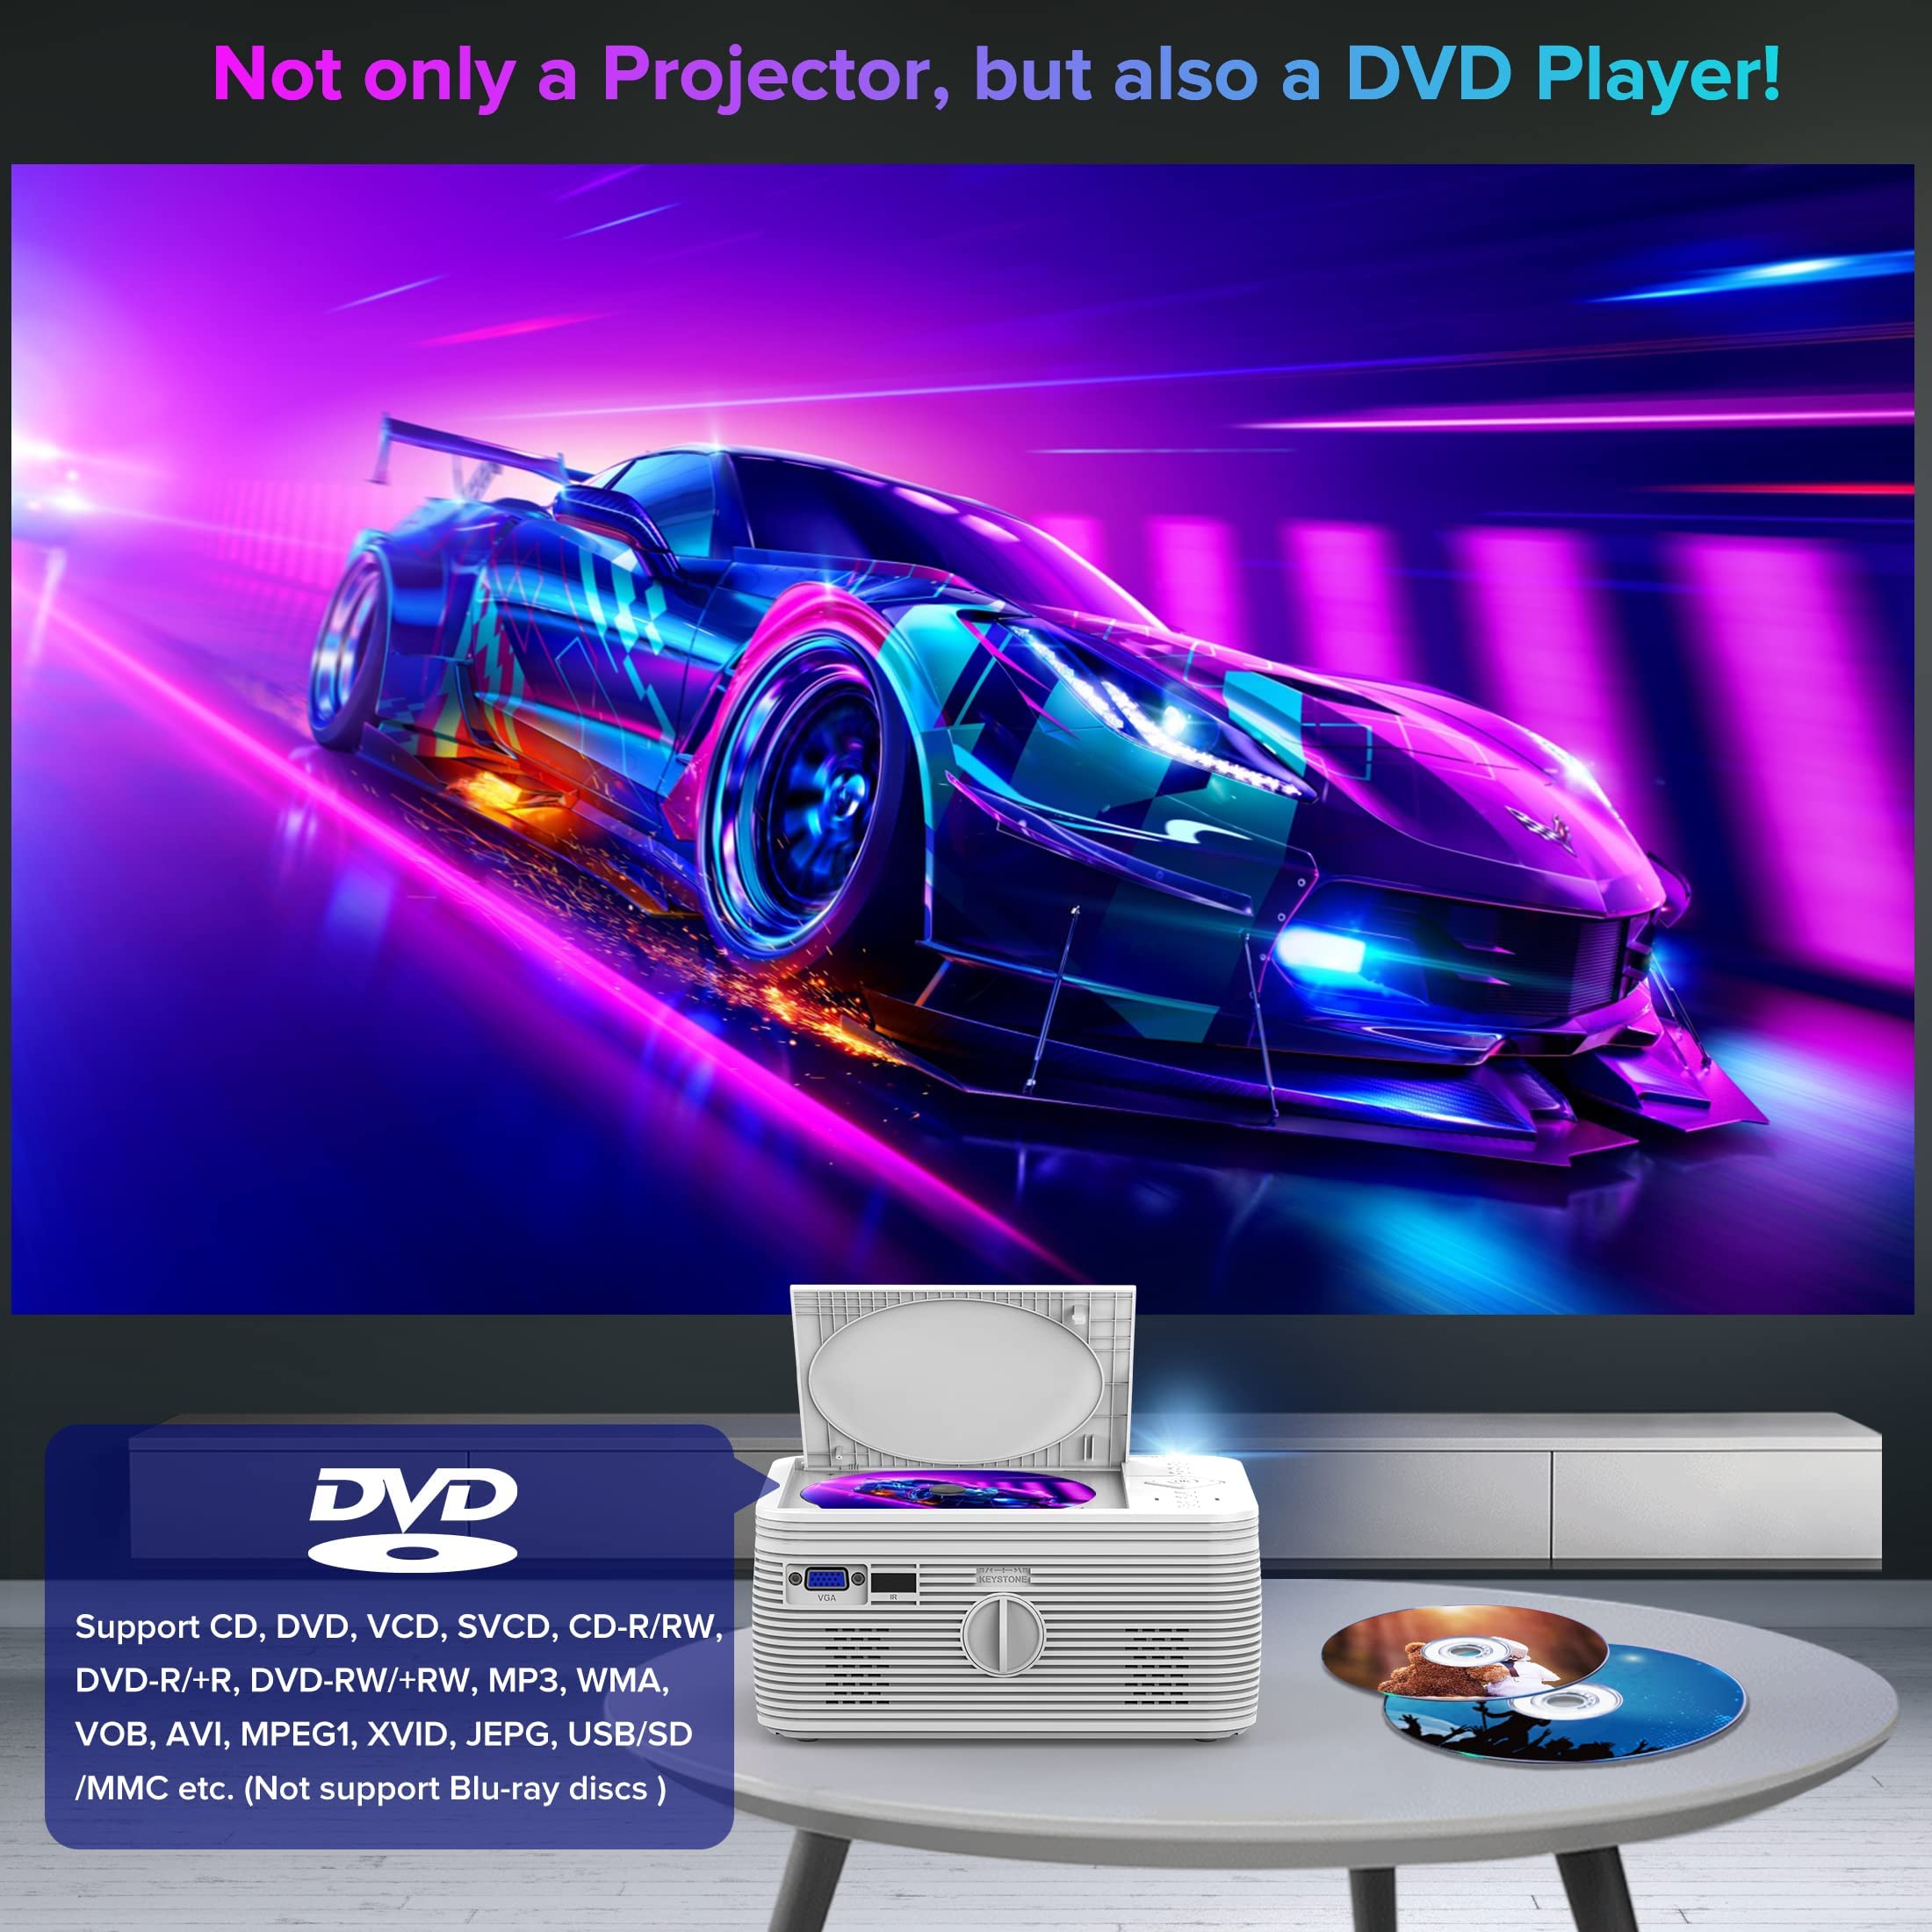 BIGASUO HD 9000L Bluetooth Projector Built in DVD Player, Mini Projector 1080P and 250”Supported with Tripod/ Carry Bag, Projector Compatible w/ TV Stick, PS5, Laptop, Portable Outdoor Movie Projector